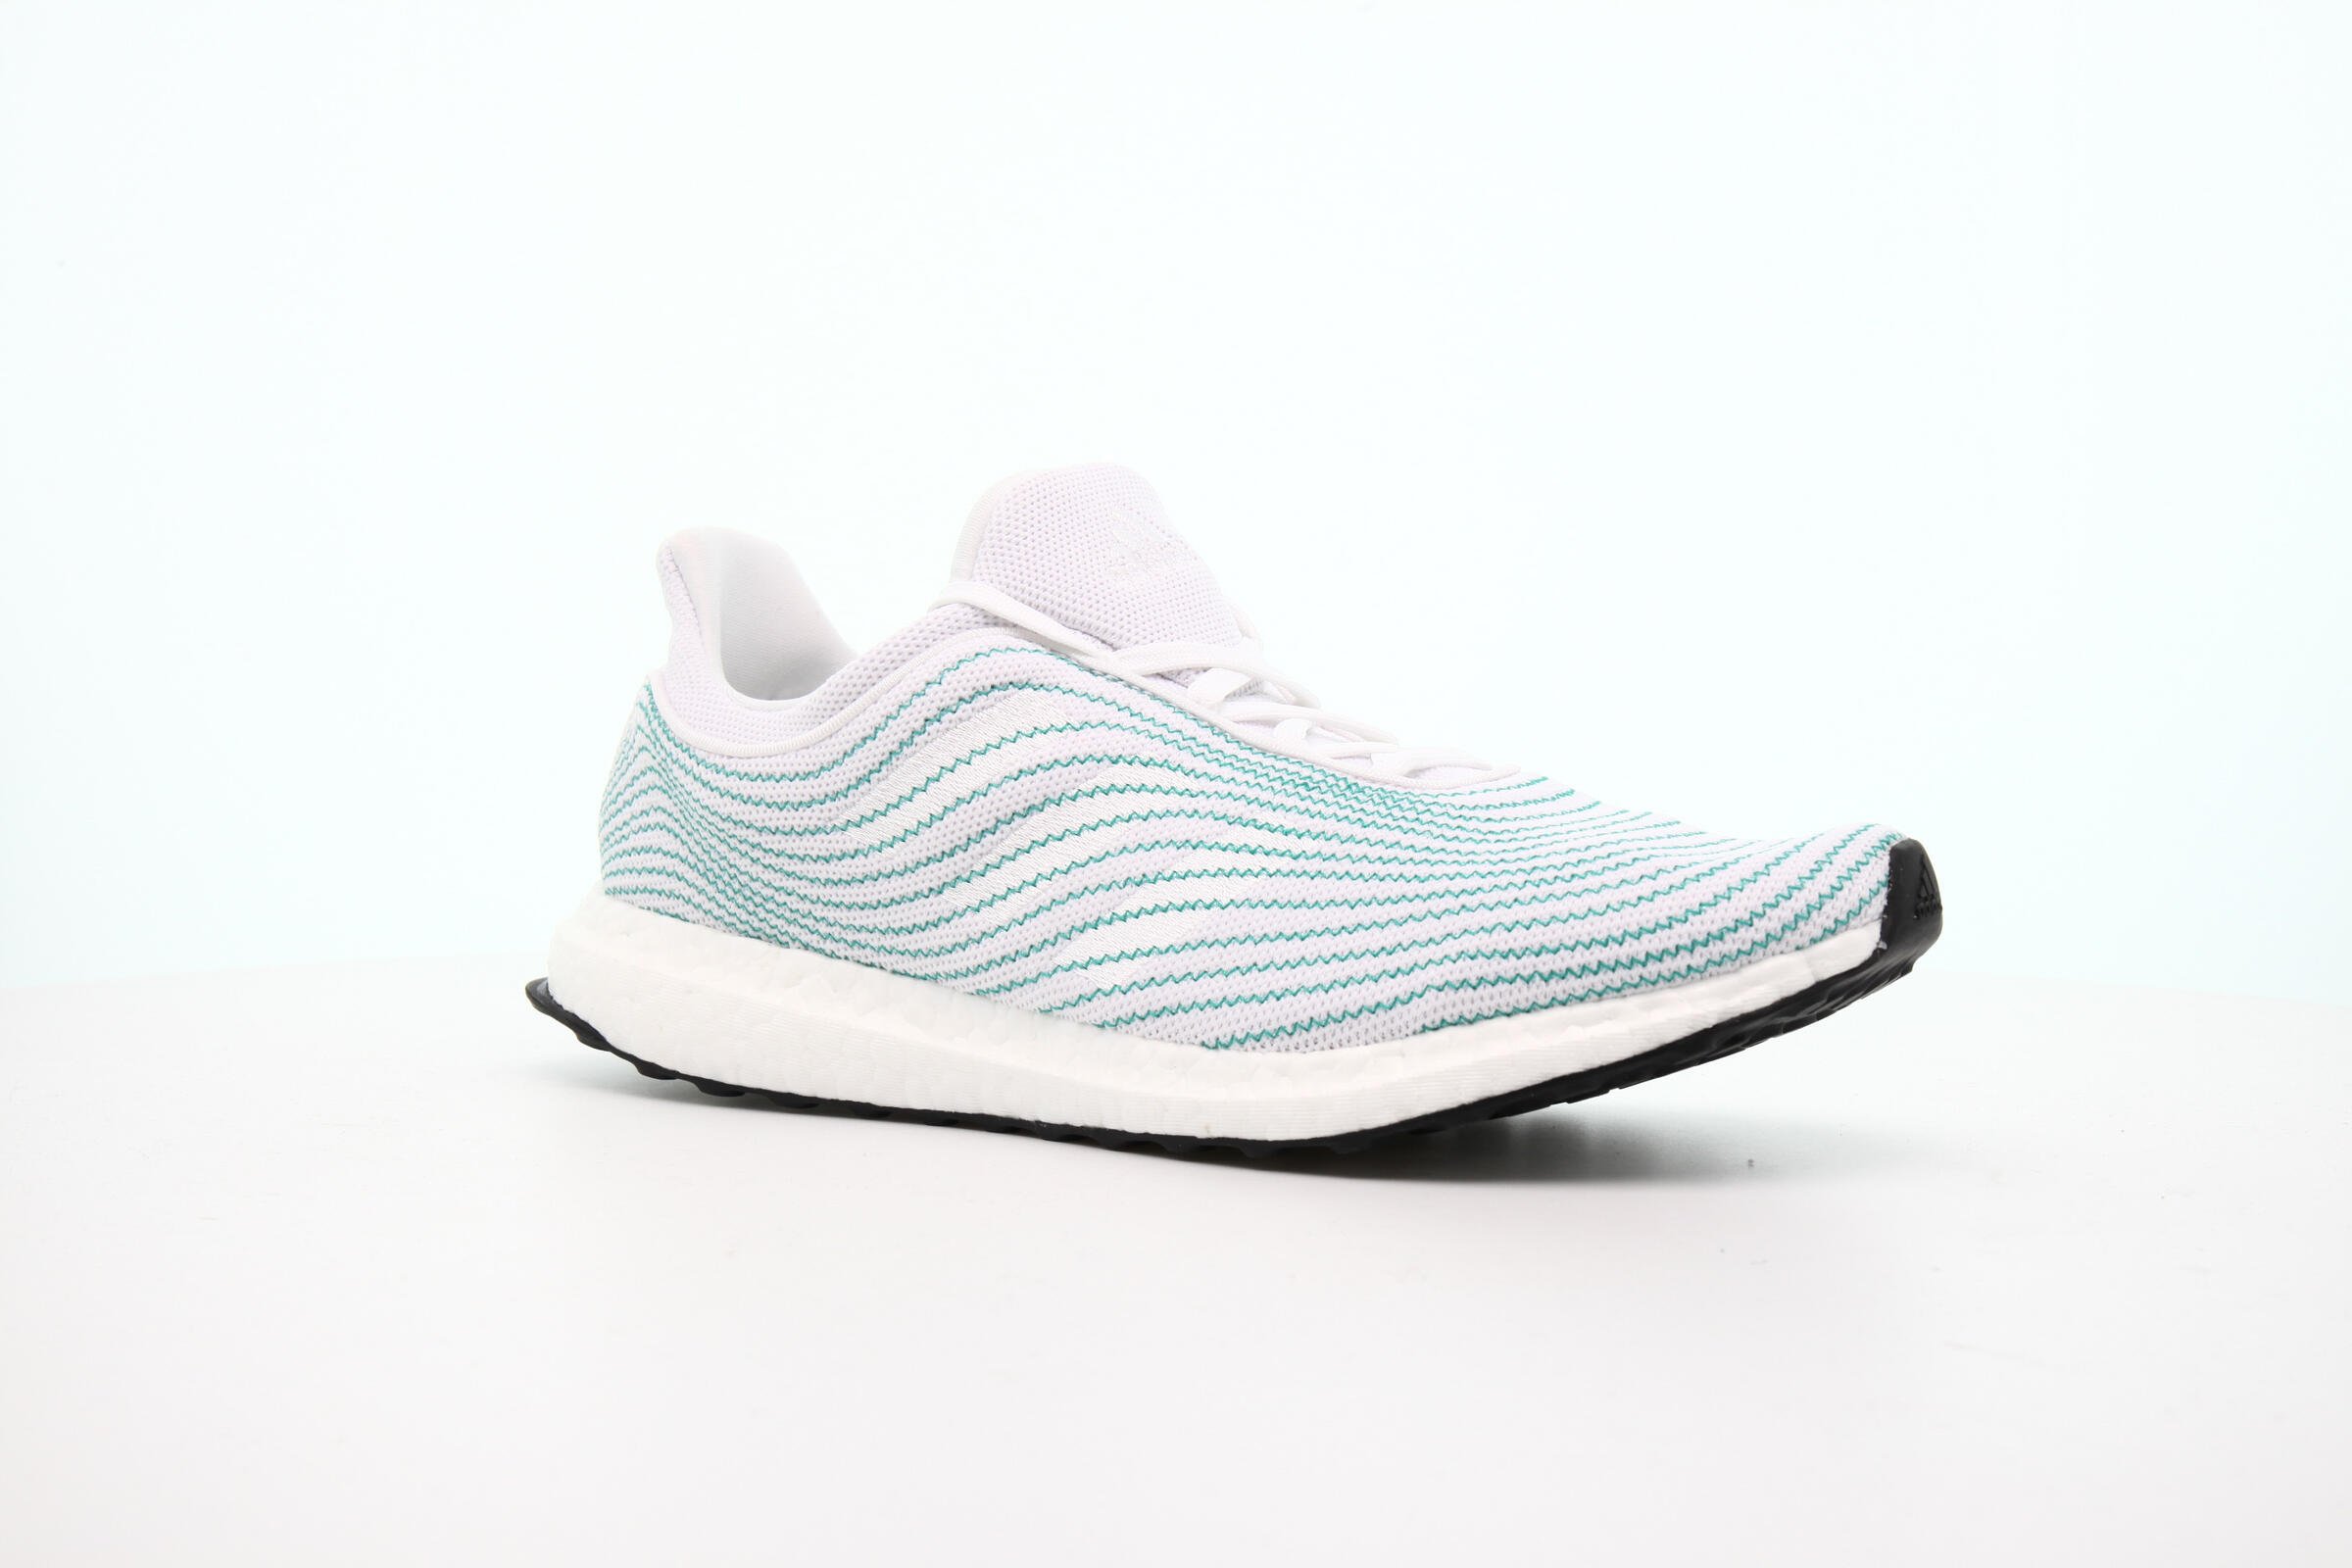 adidas Performance ULTRABOOST PARLEY UNCAGED  "WHITE"